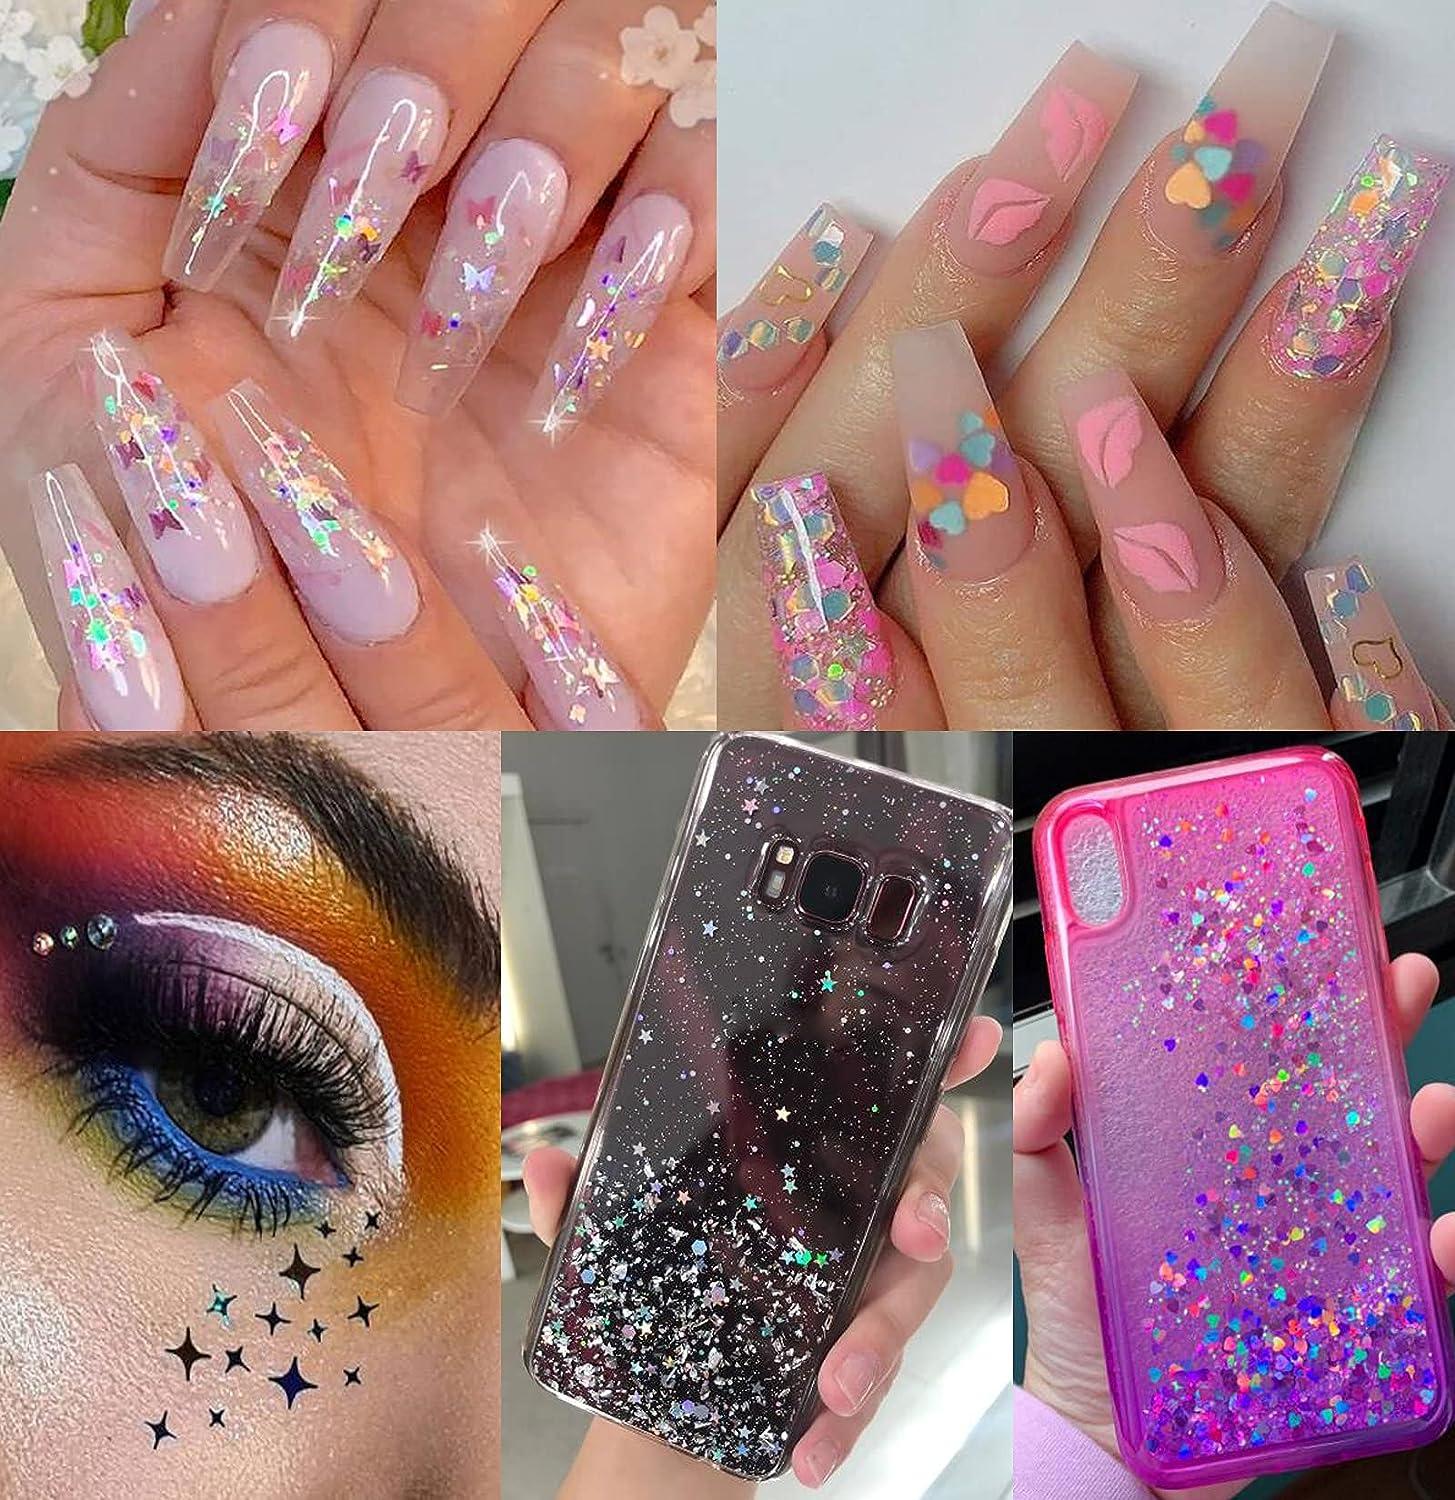 Twinkled T Holographic Flakes for Nail Art (Star Light)